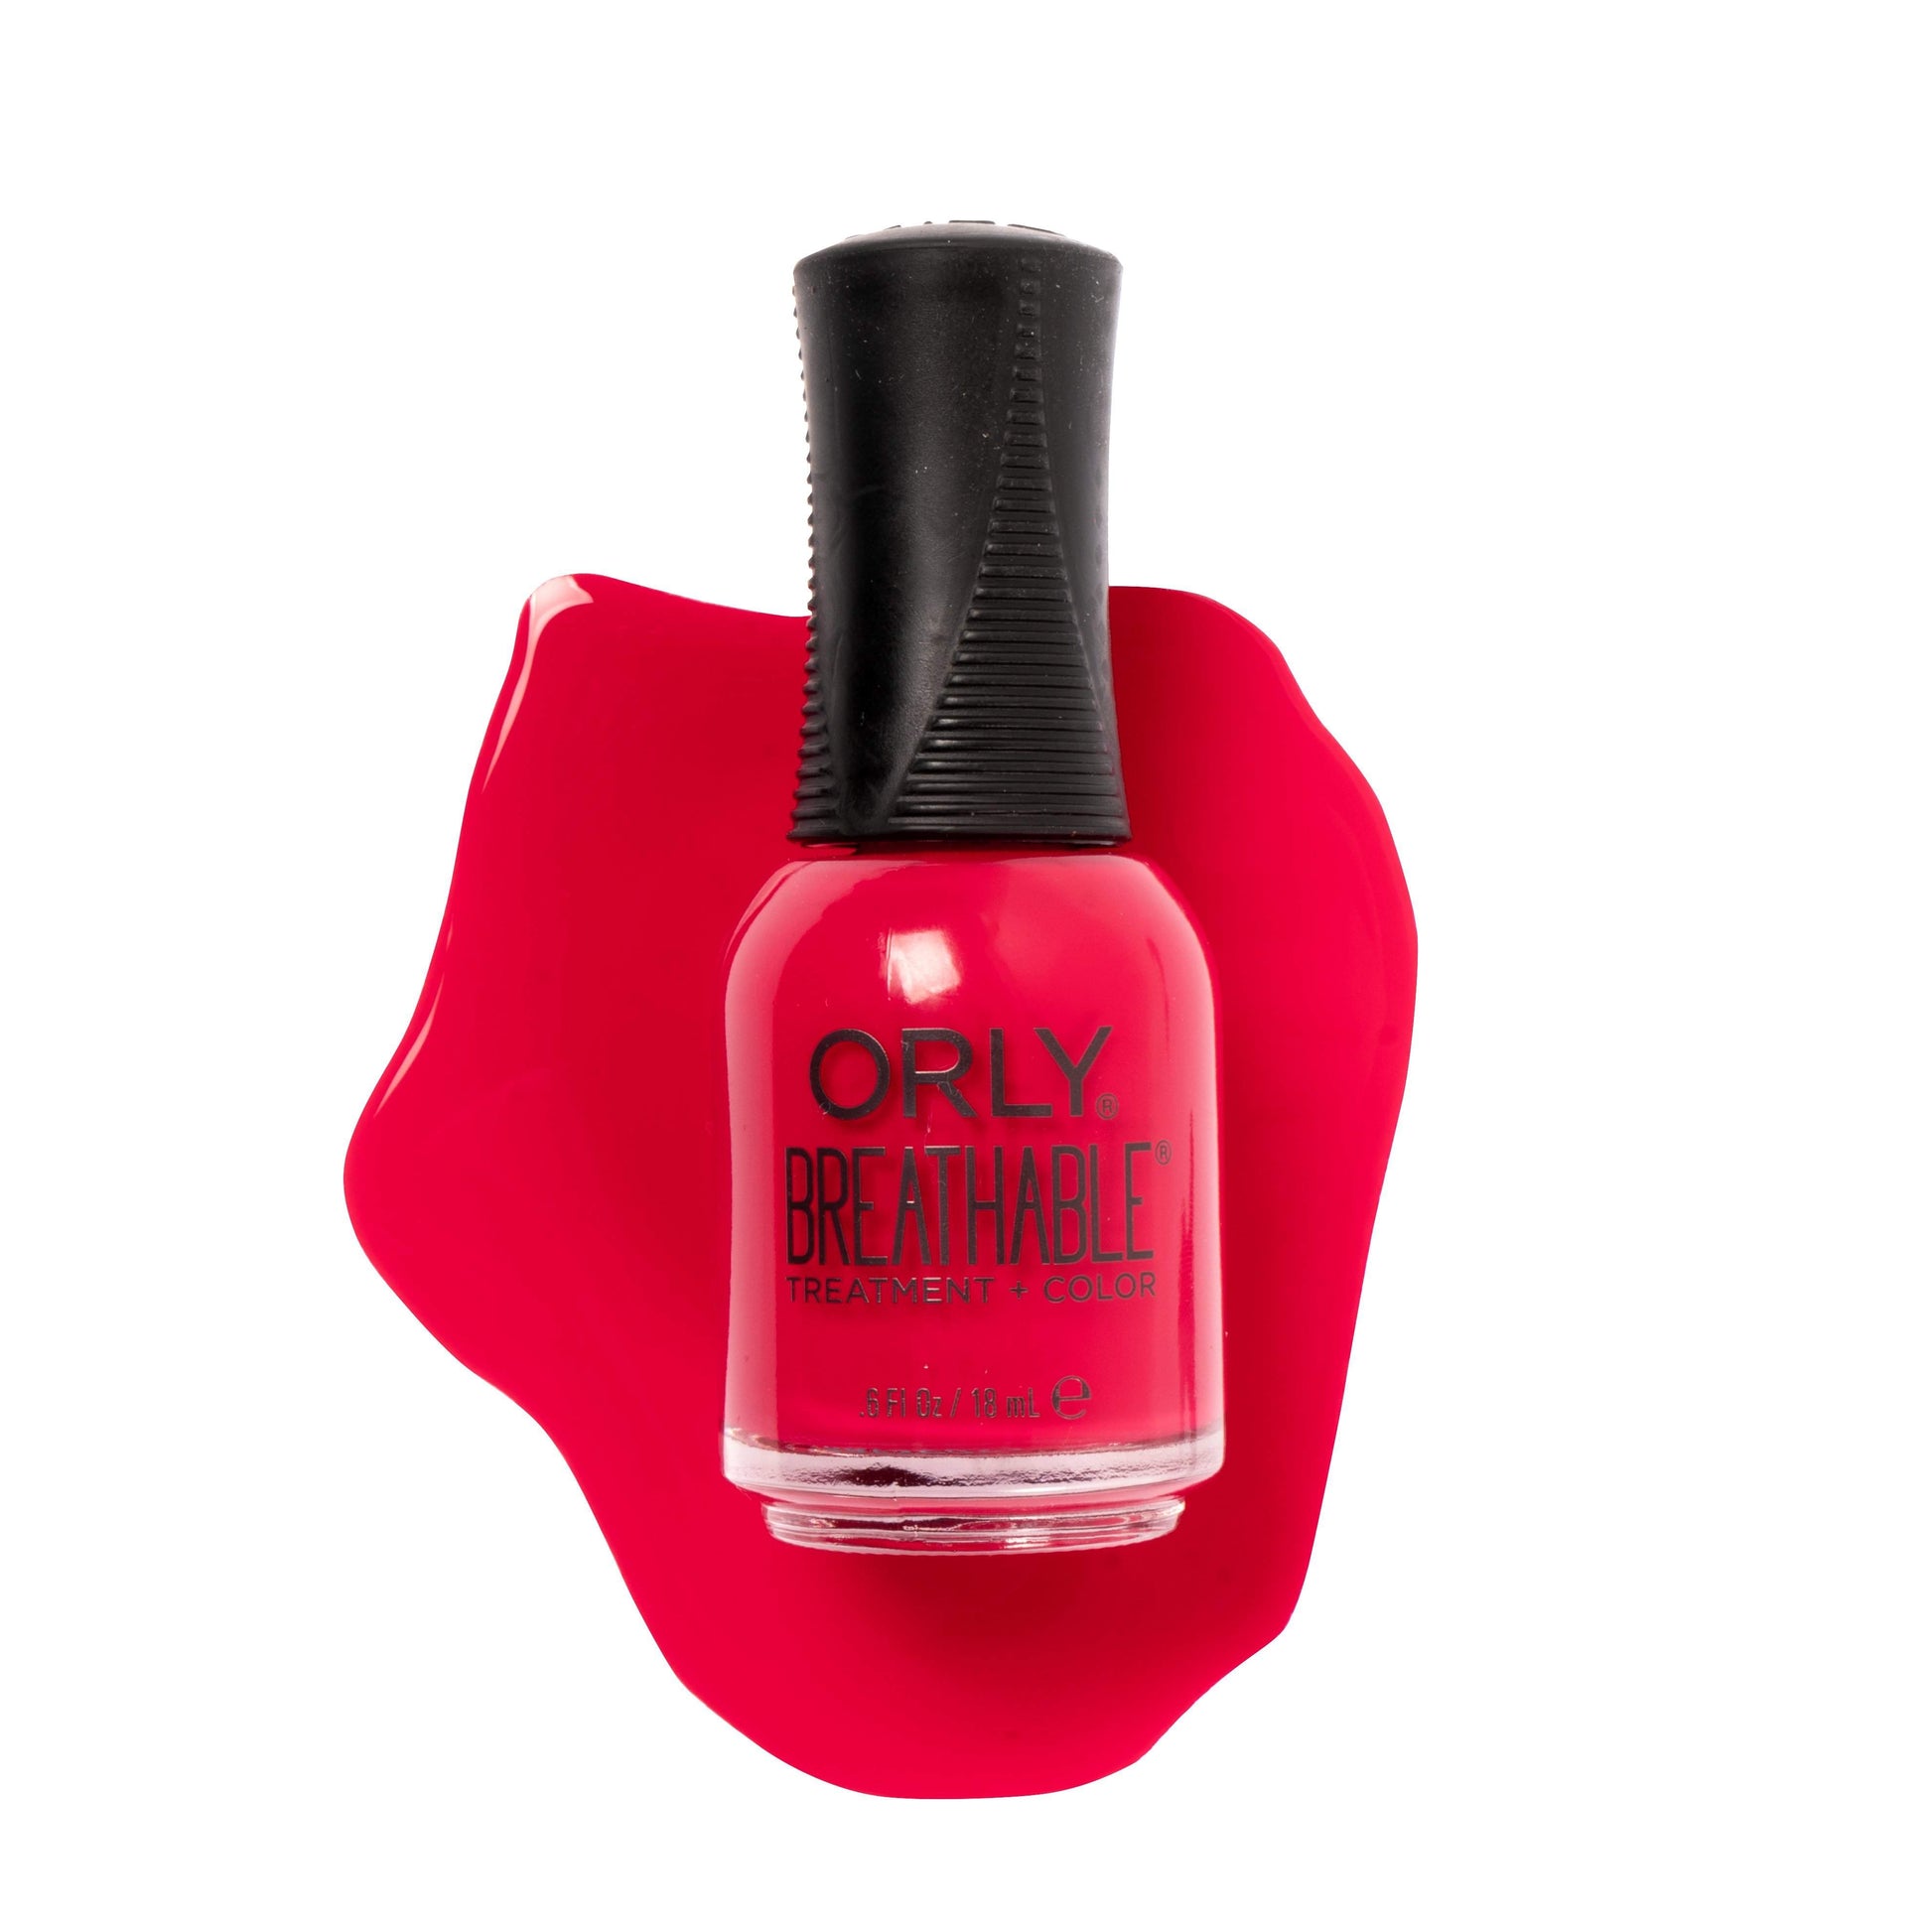 Orly Breathable Love My Nails .6Fl oz/18ml 20905-Orly-Brand_Orly,Collection_Nails,Nail_Polish,ORLY_Summer Laquers